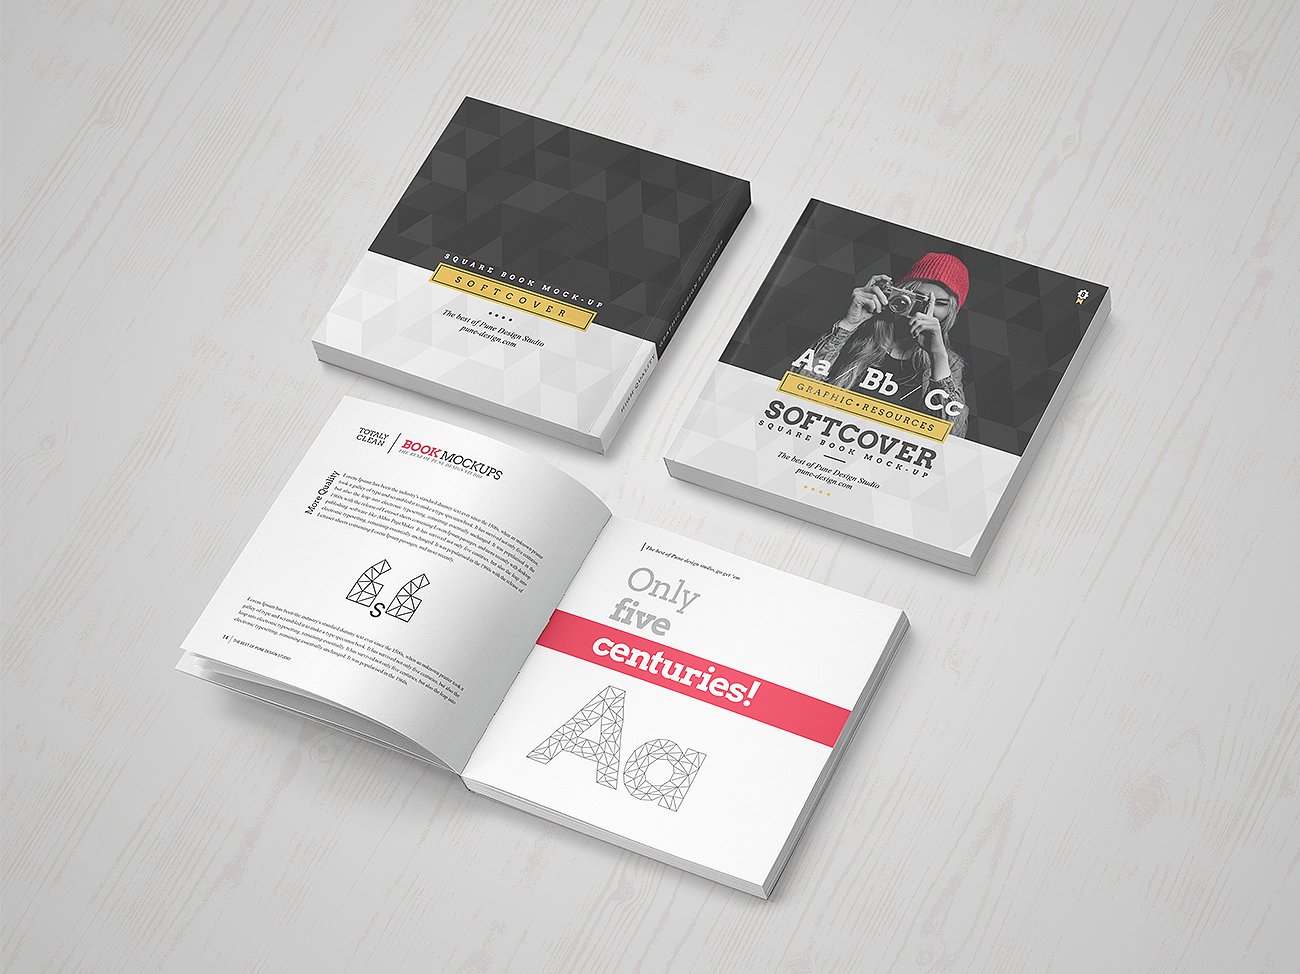 Softcover Square Book Mock-Up